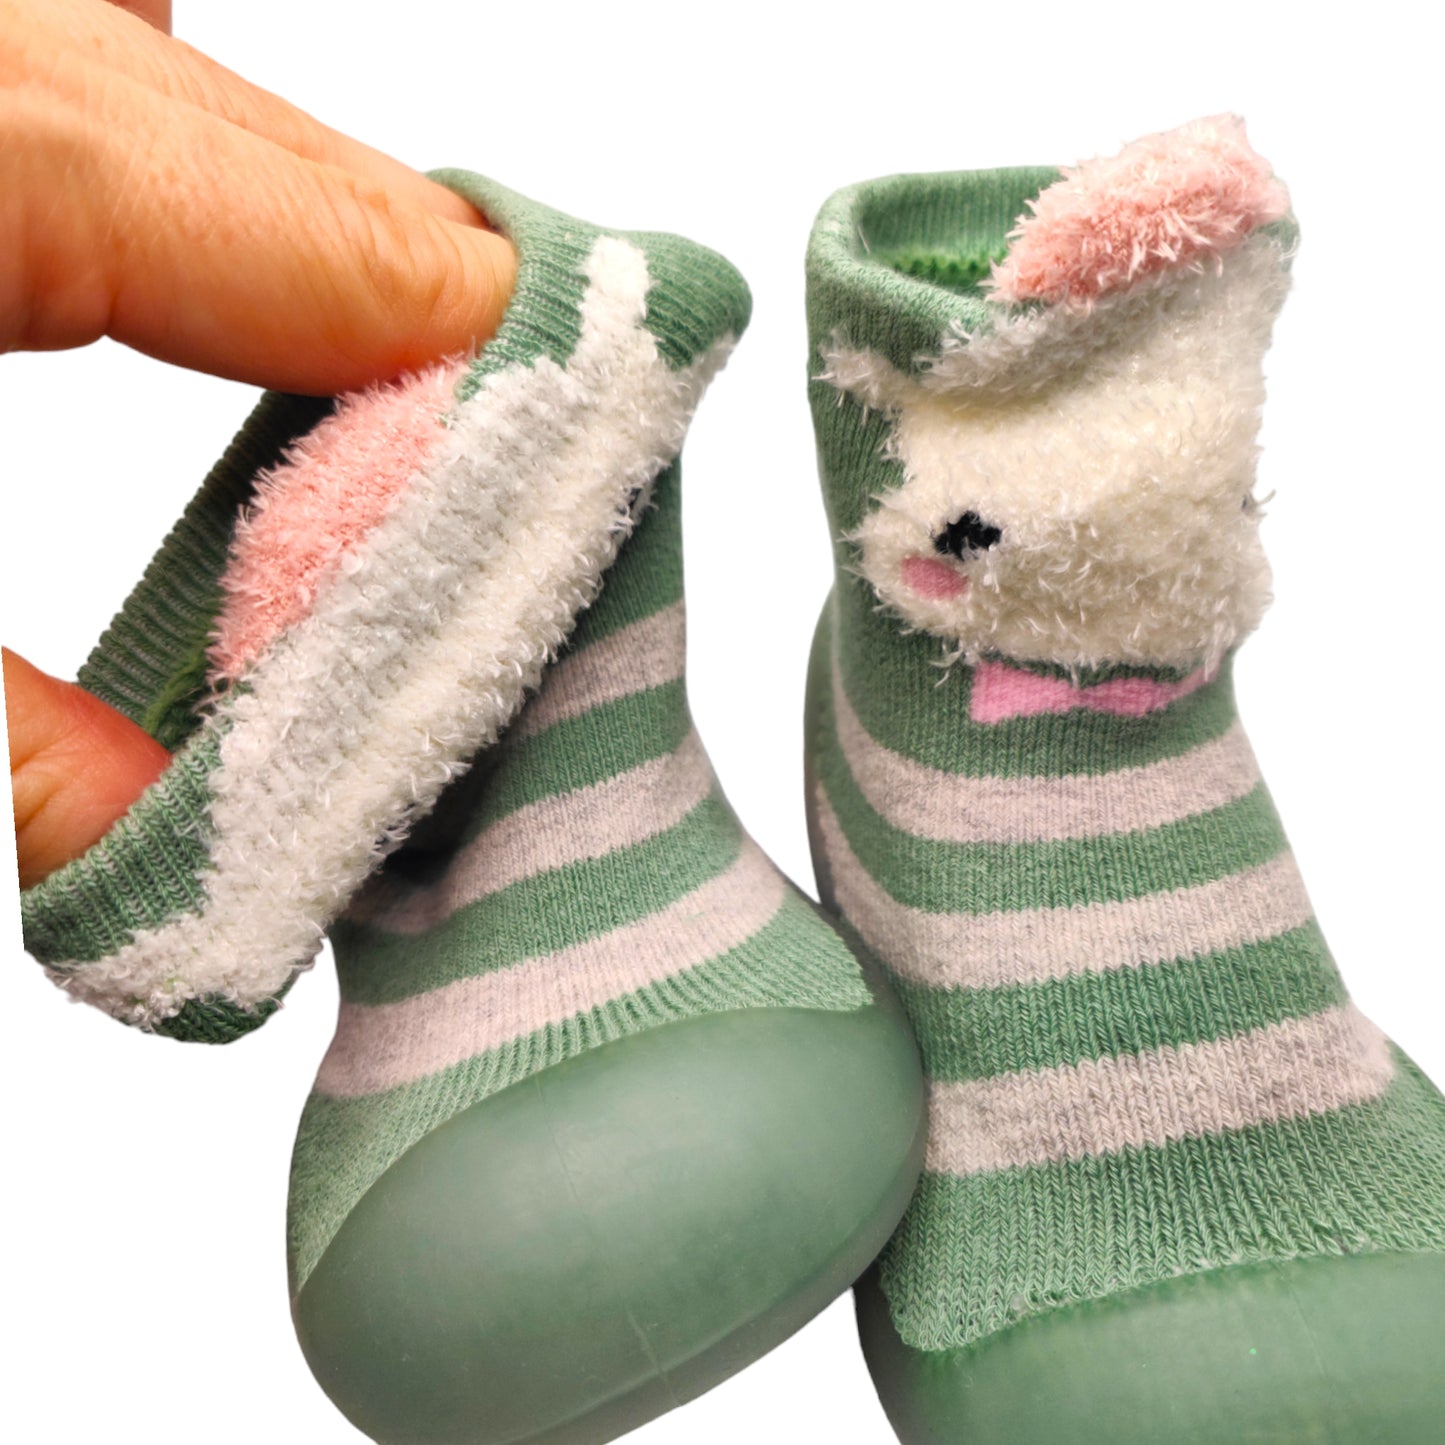 Llama by Bearba- Sock Shoes for Babies & Toddlers Sizes-S,M,L,XL- Flexible Soles, Lightweight, Machine Washable-Green/Soft